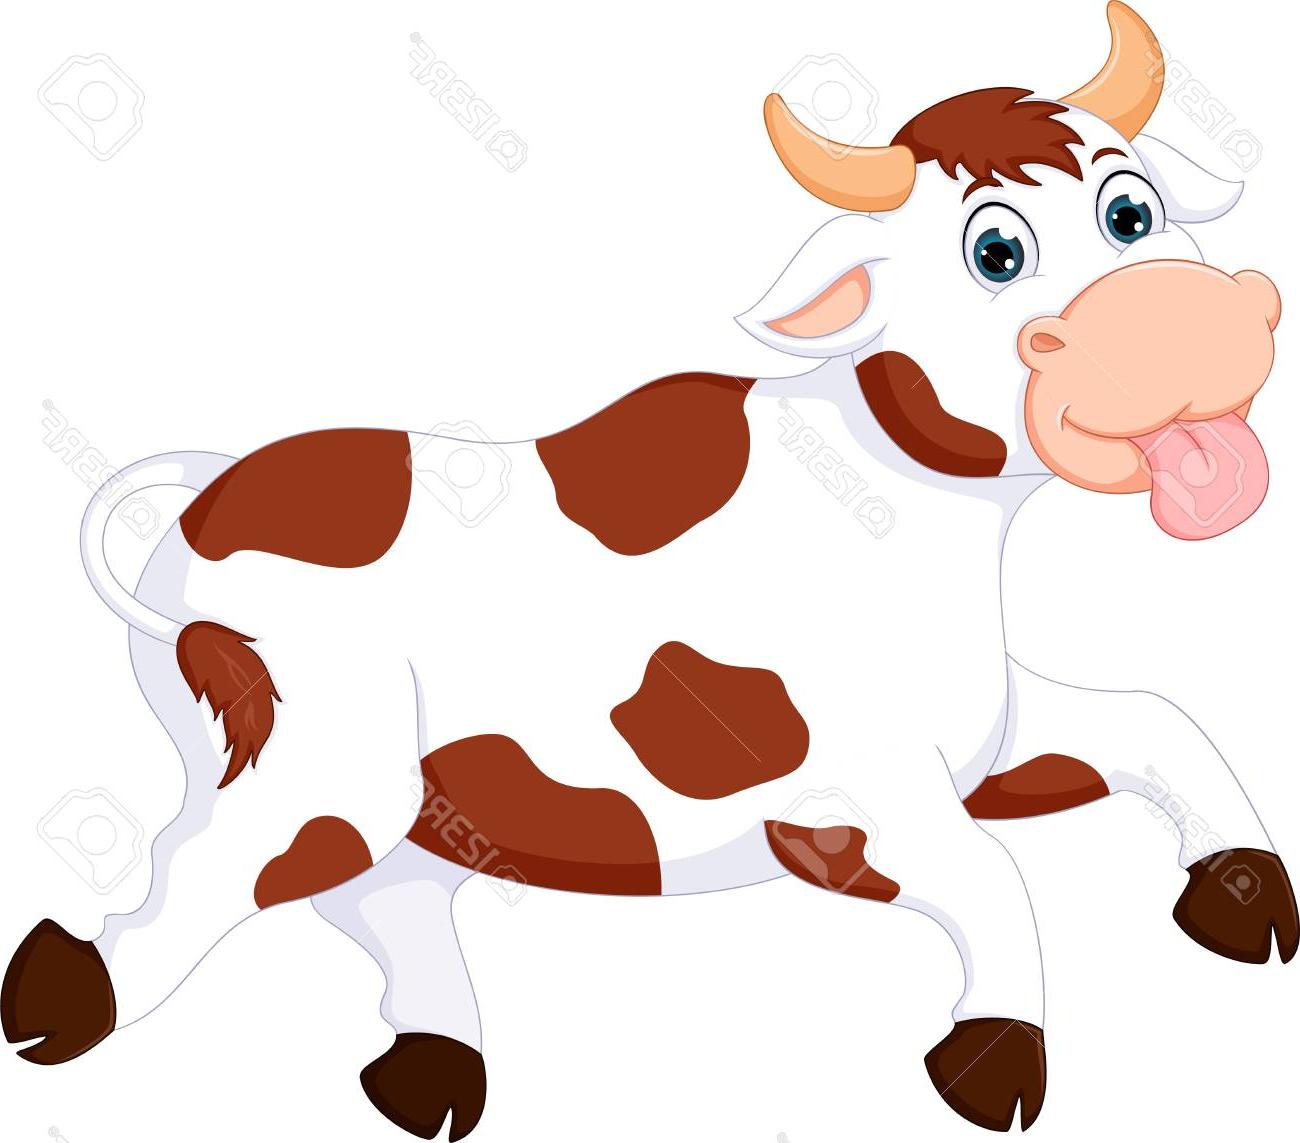 Clipart cow file. Best free funny cartoons